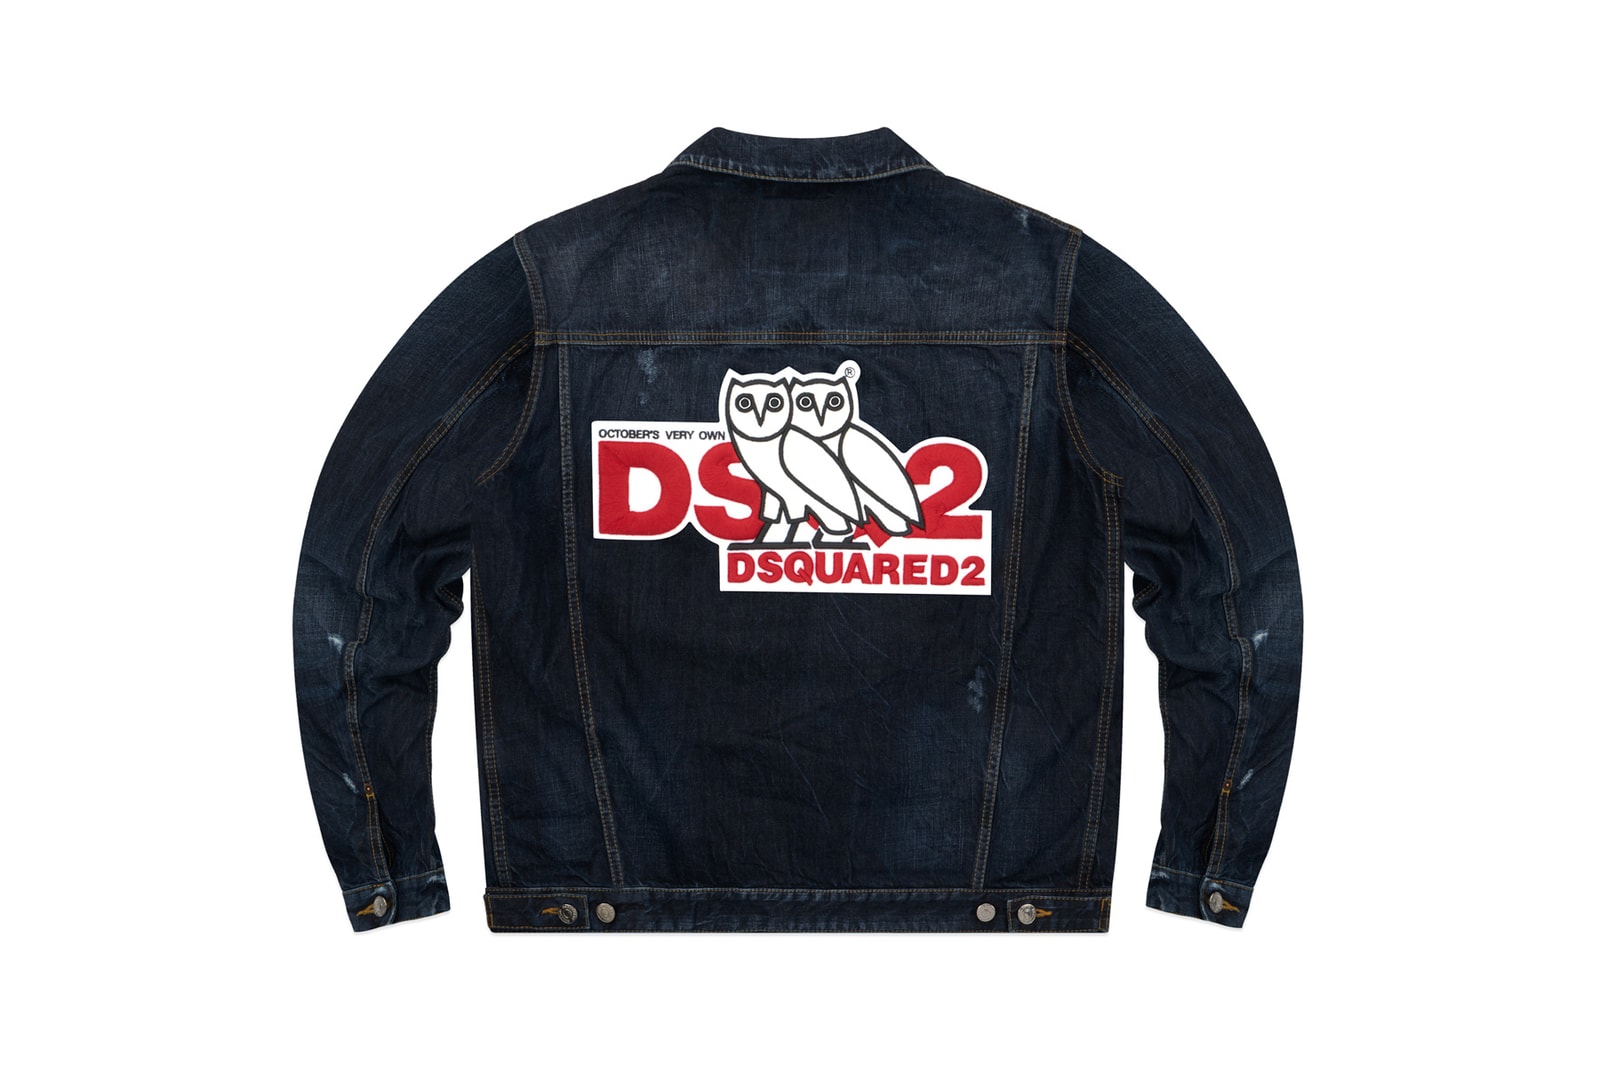 OVO x Dsquared2 SS19 Collaboration spring summer October's very own drake canada owl logo